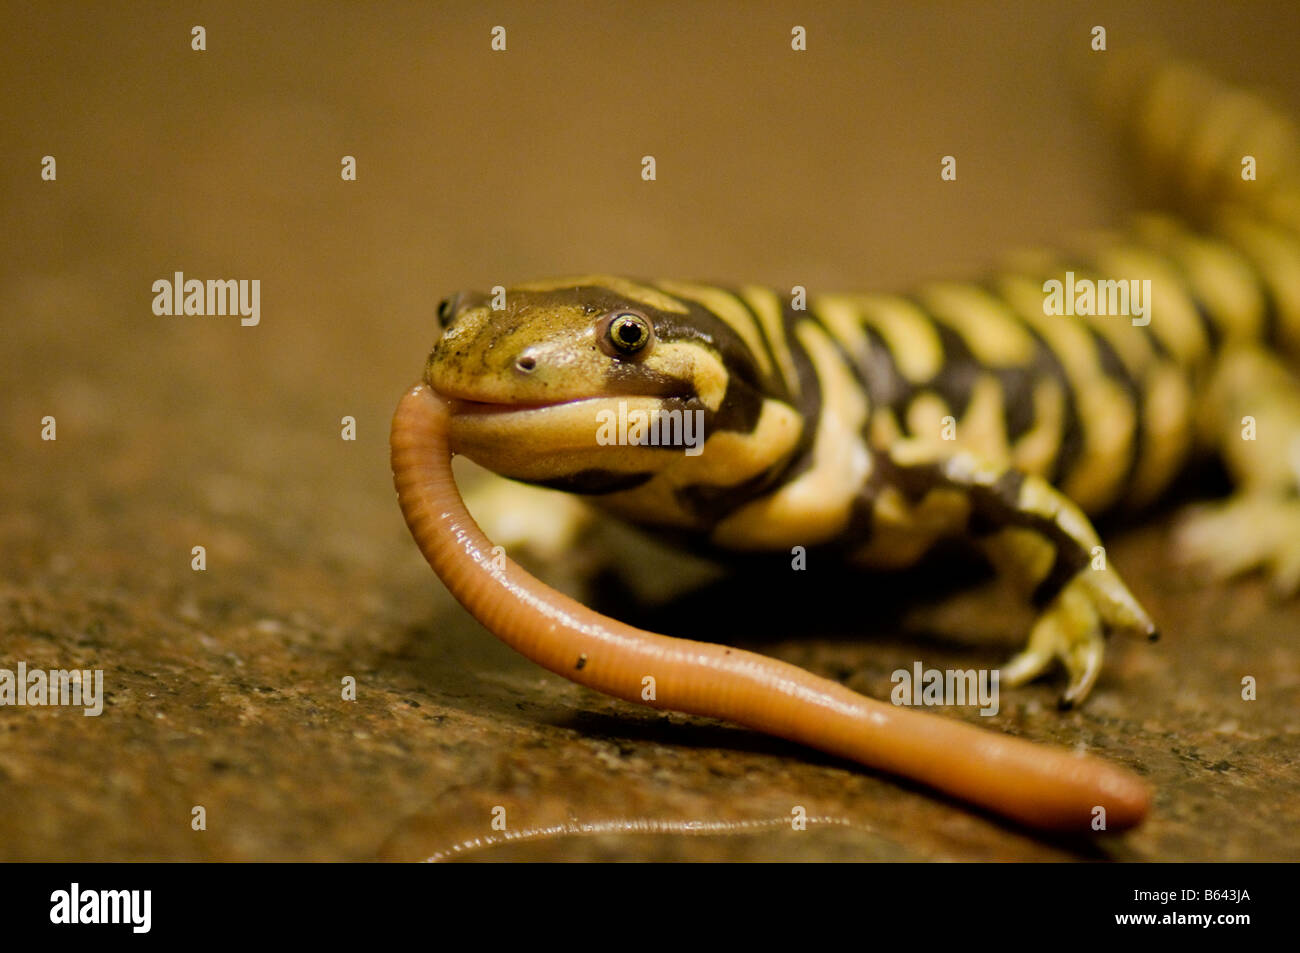 A close-up of a tiger salamander seaming smiling, while enjoying eating a earthworm dinner. Stock Photo